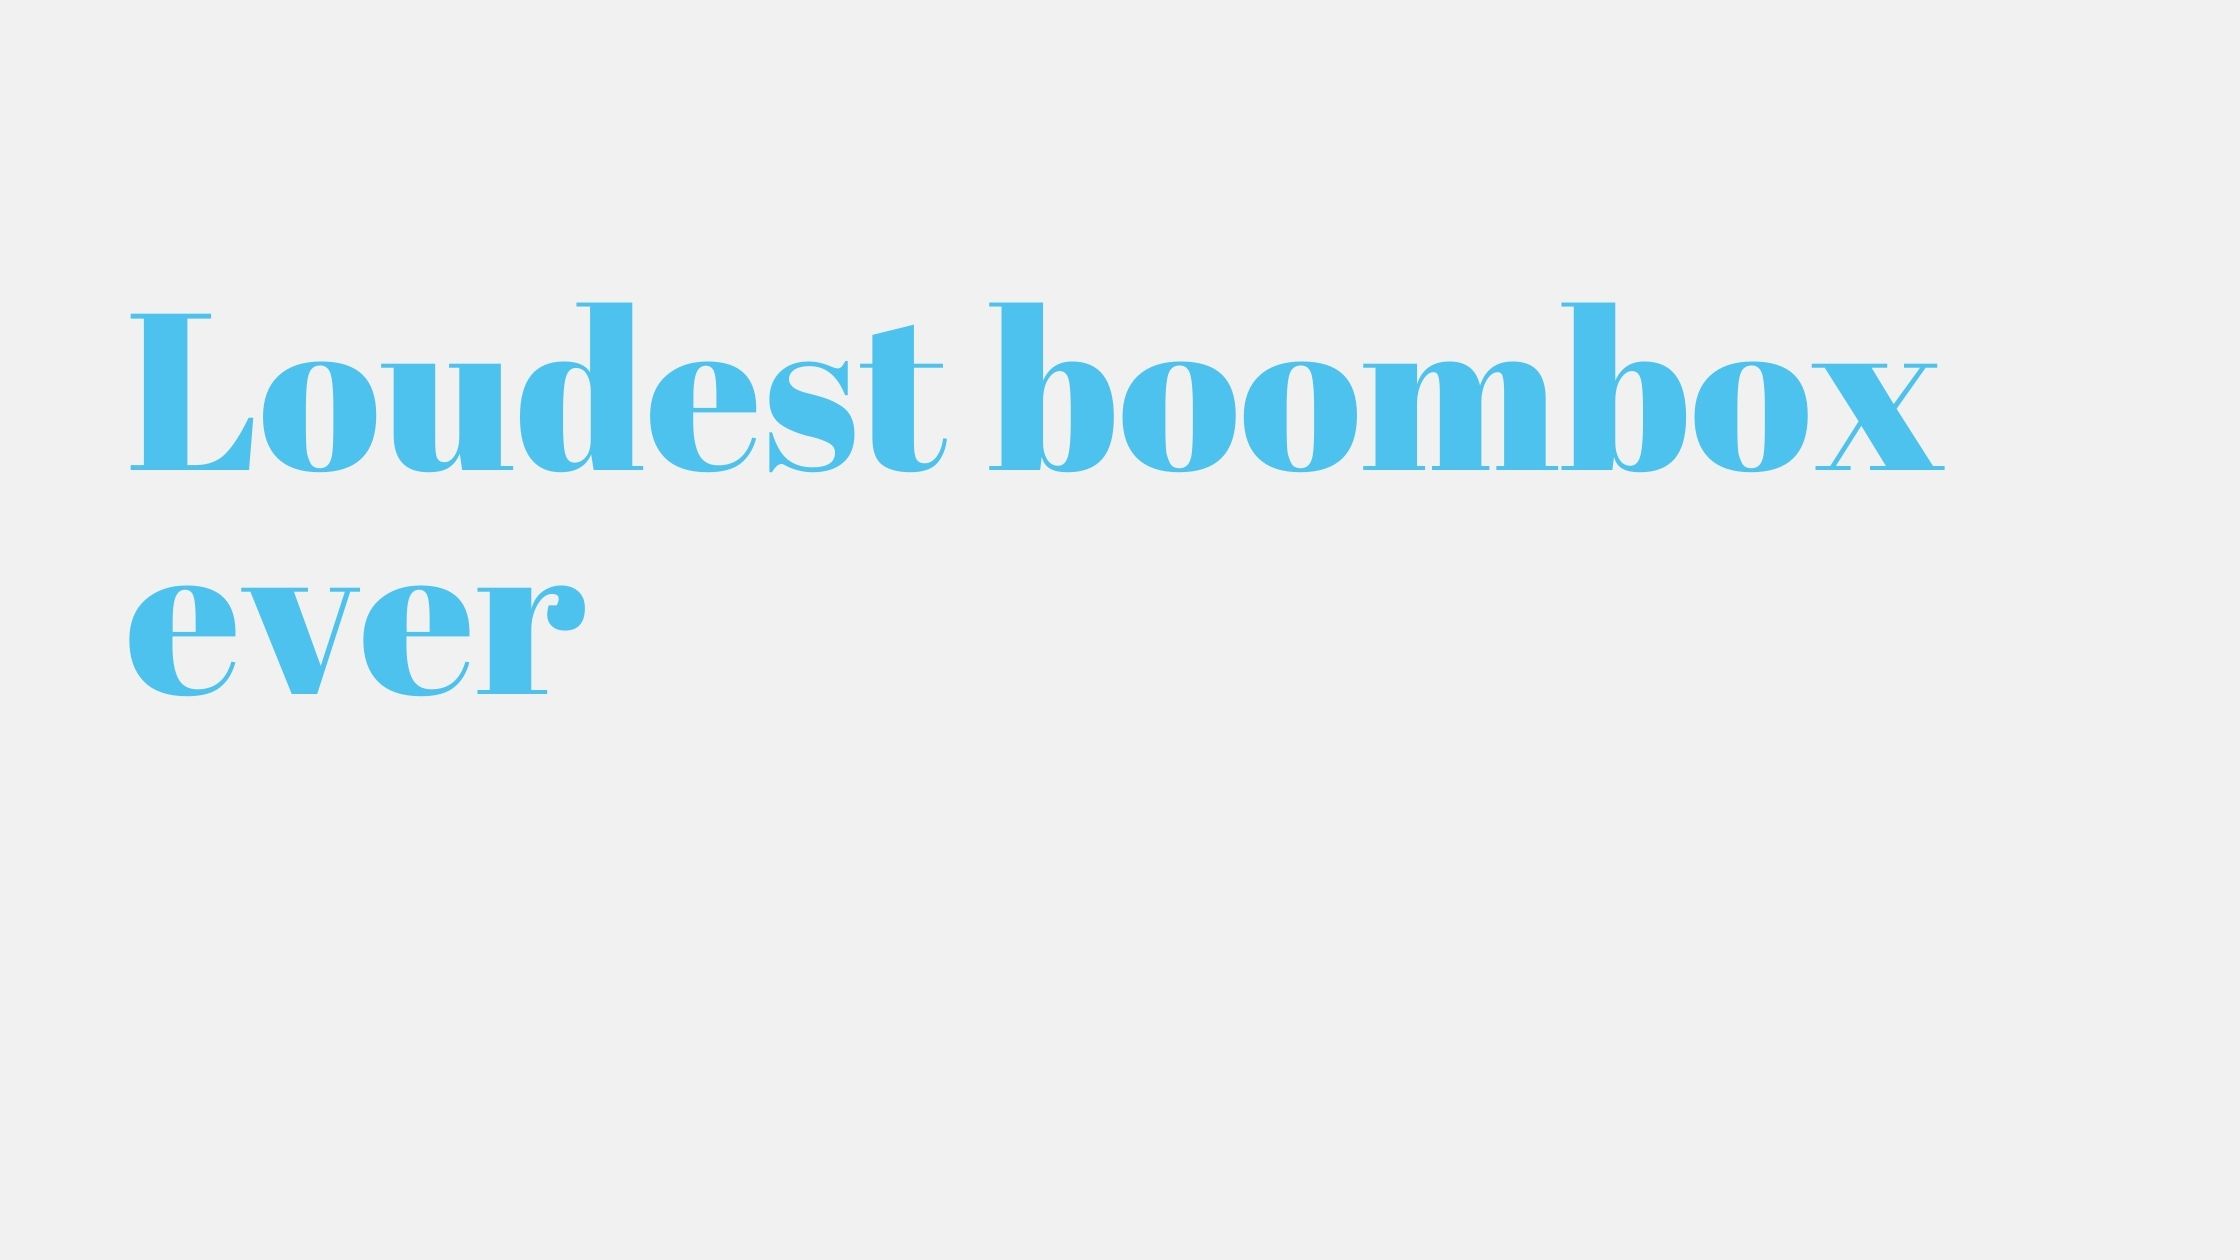 You are currently viewing Loudest boombox ever